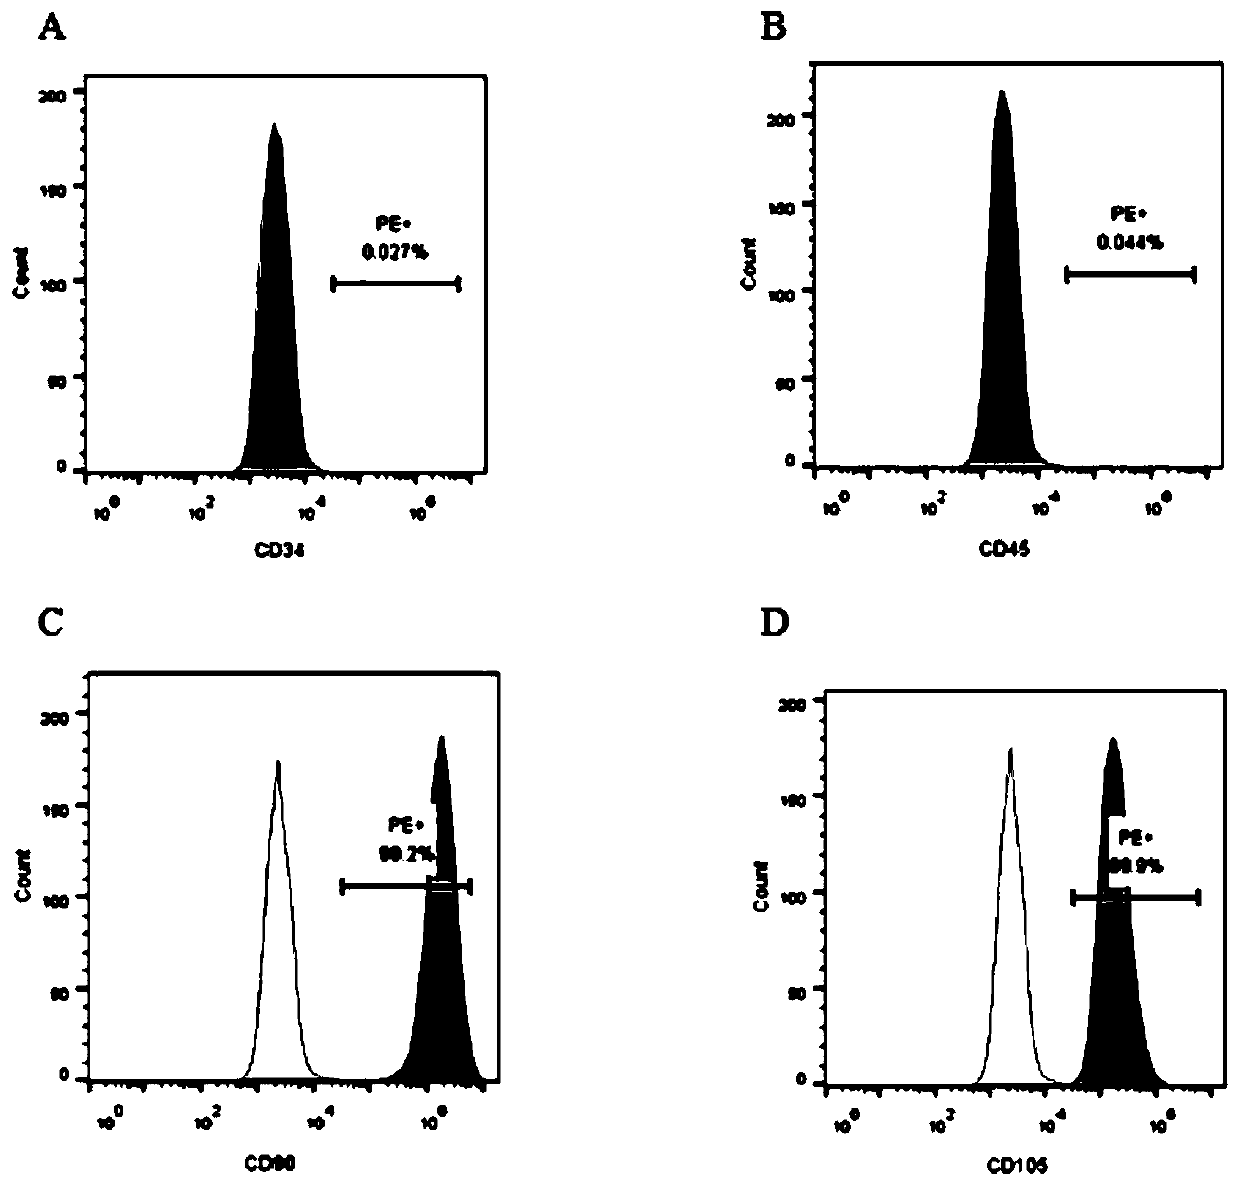 Application of circRNA PRKD3 to osteogenic differentiation of periodontal ligament stem cells